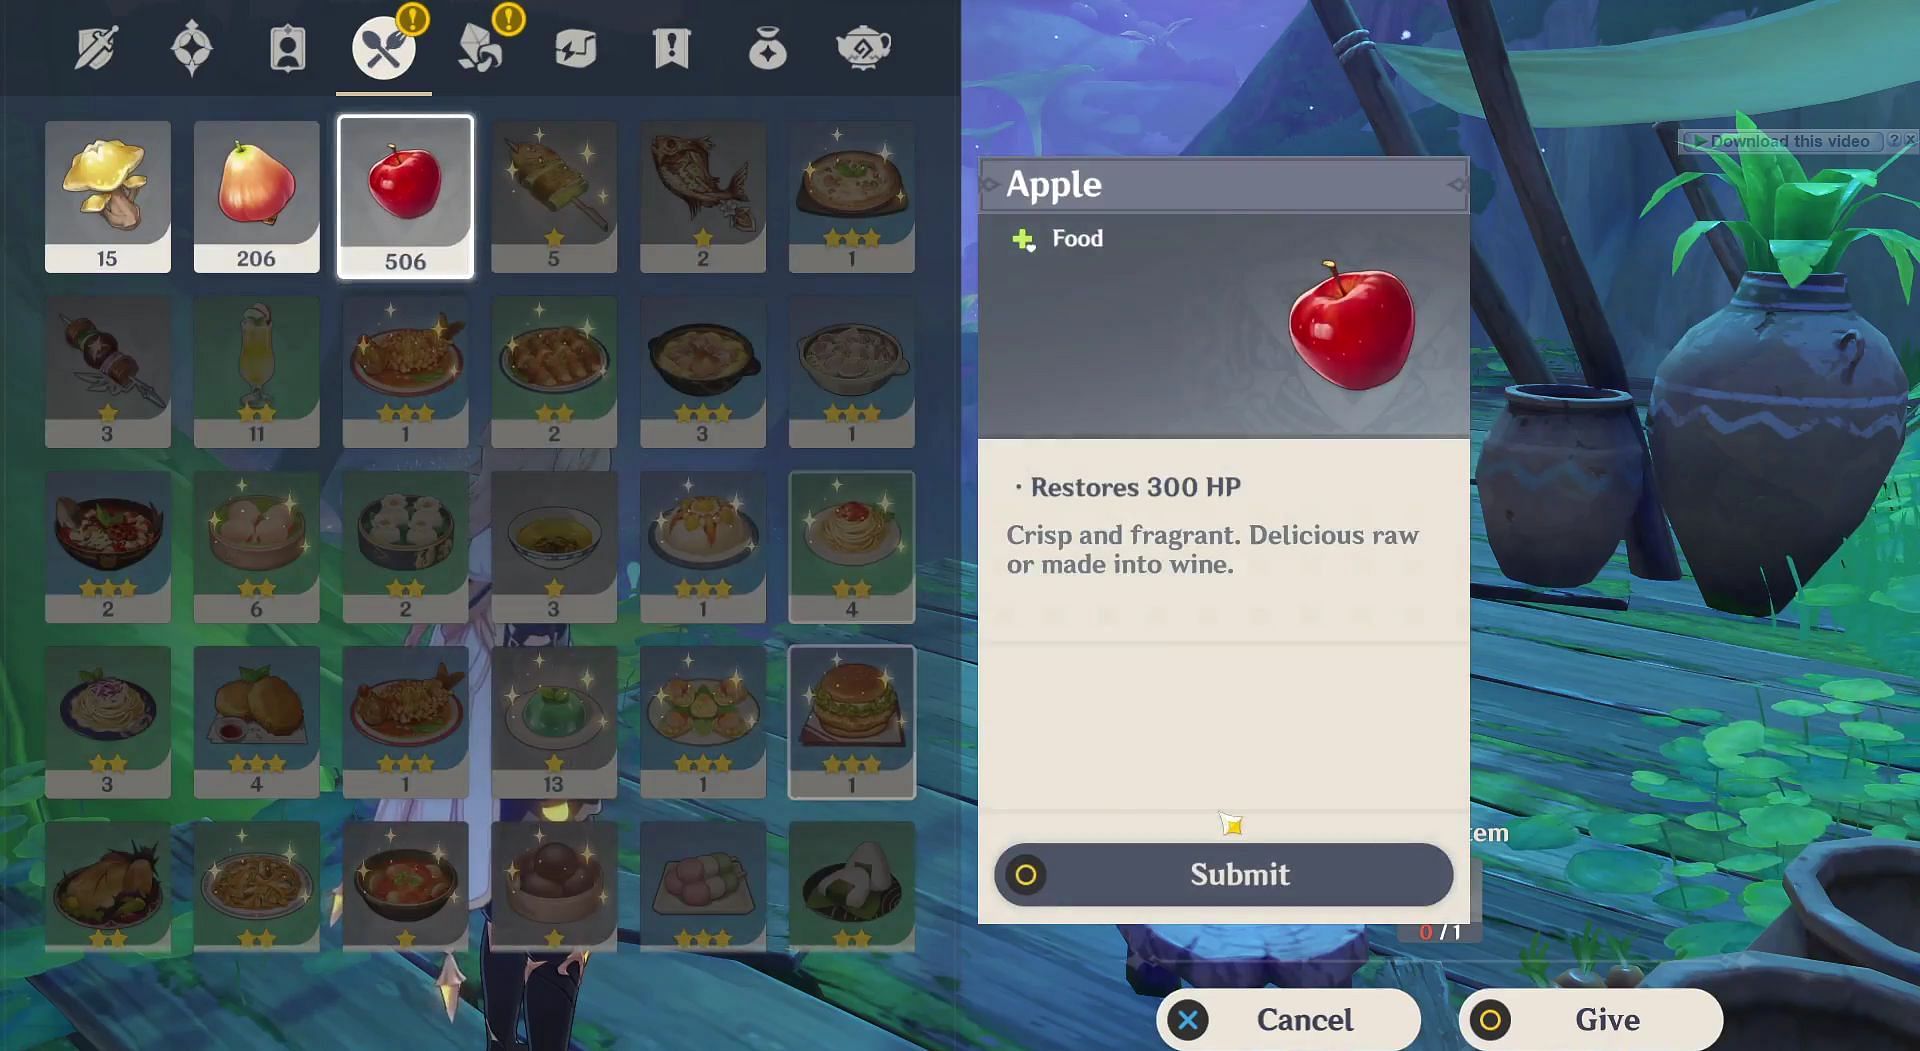 Apple is the first answer to the riddle (Image via HoYoverse)